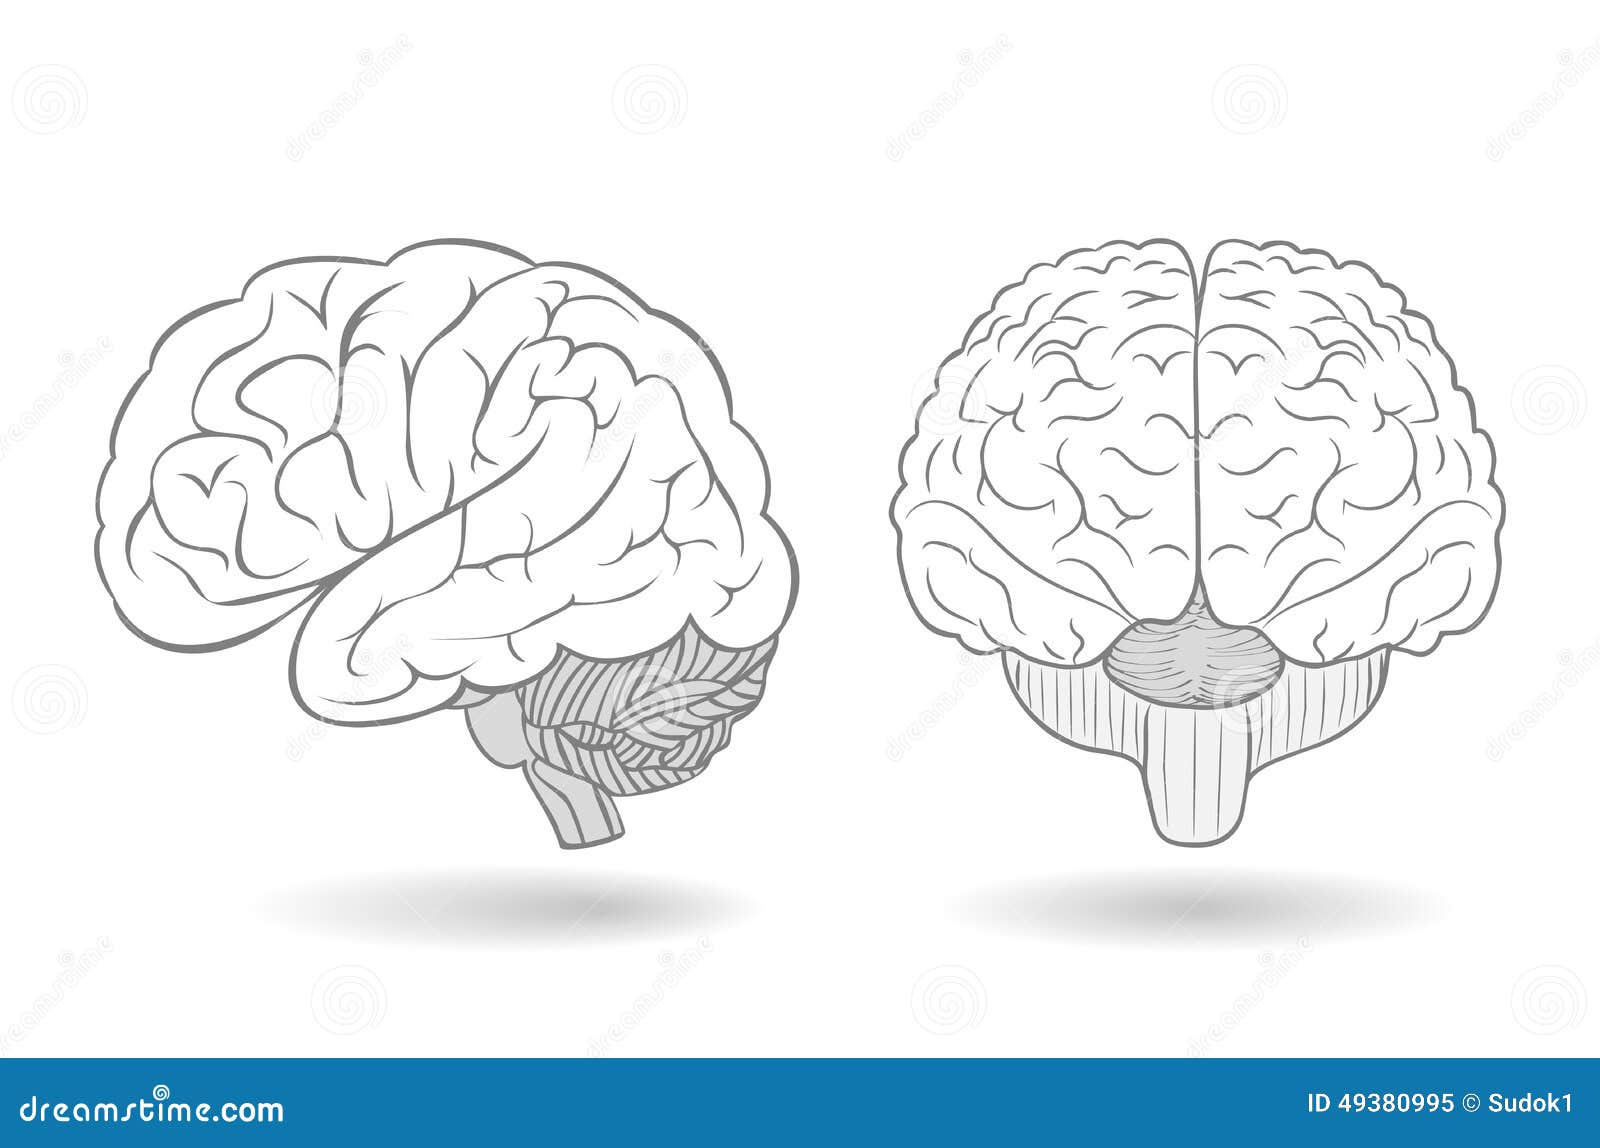 human brain in two perspectives